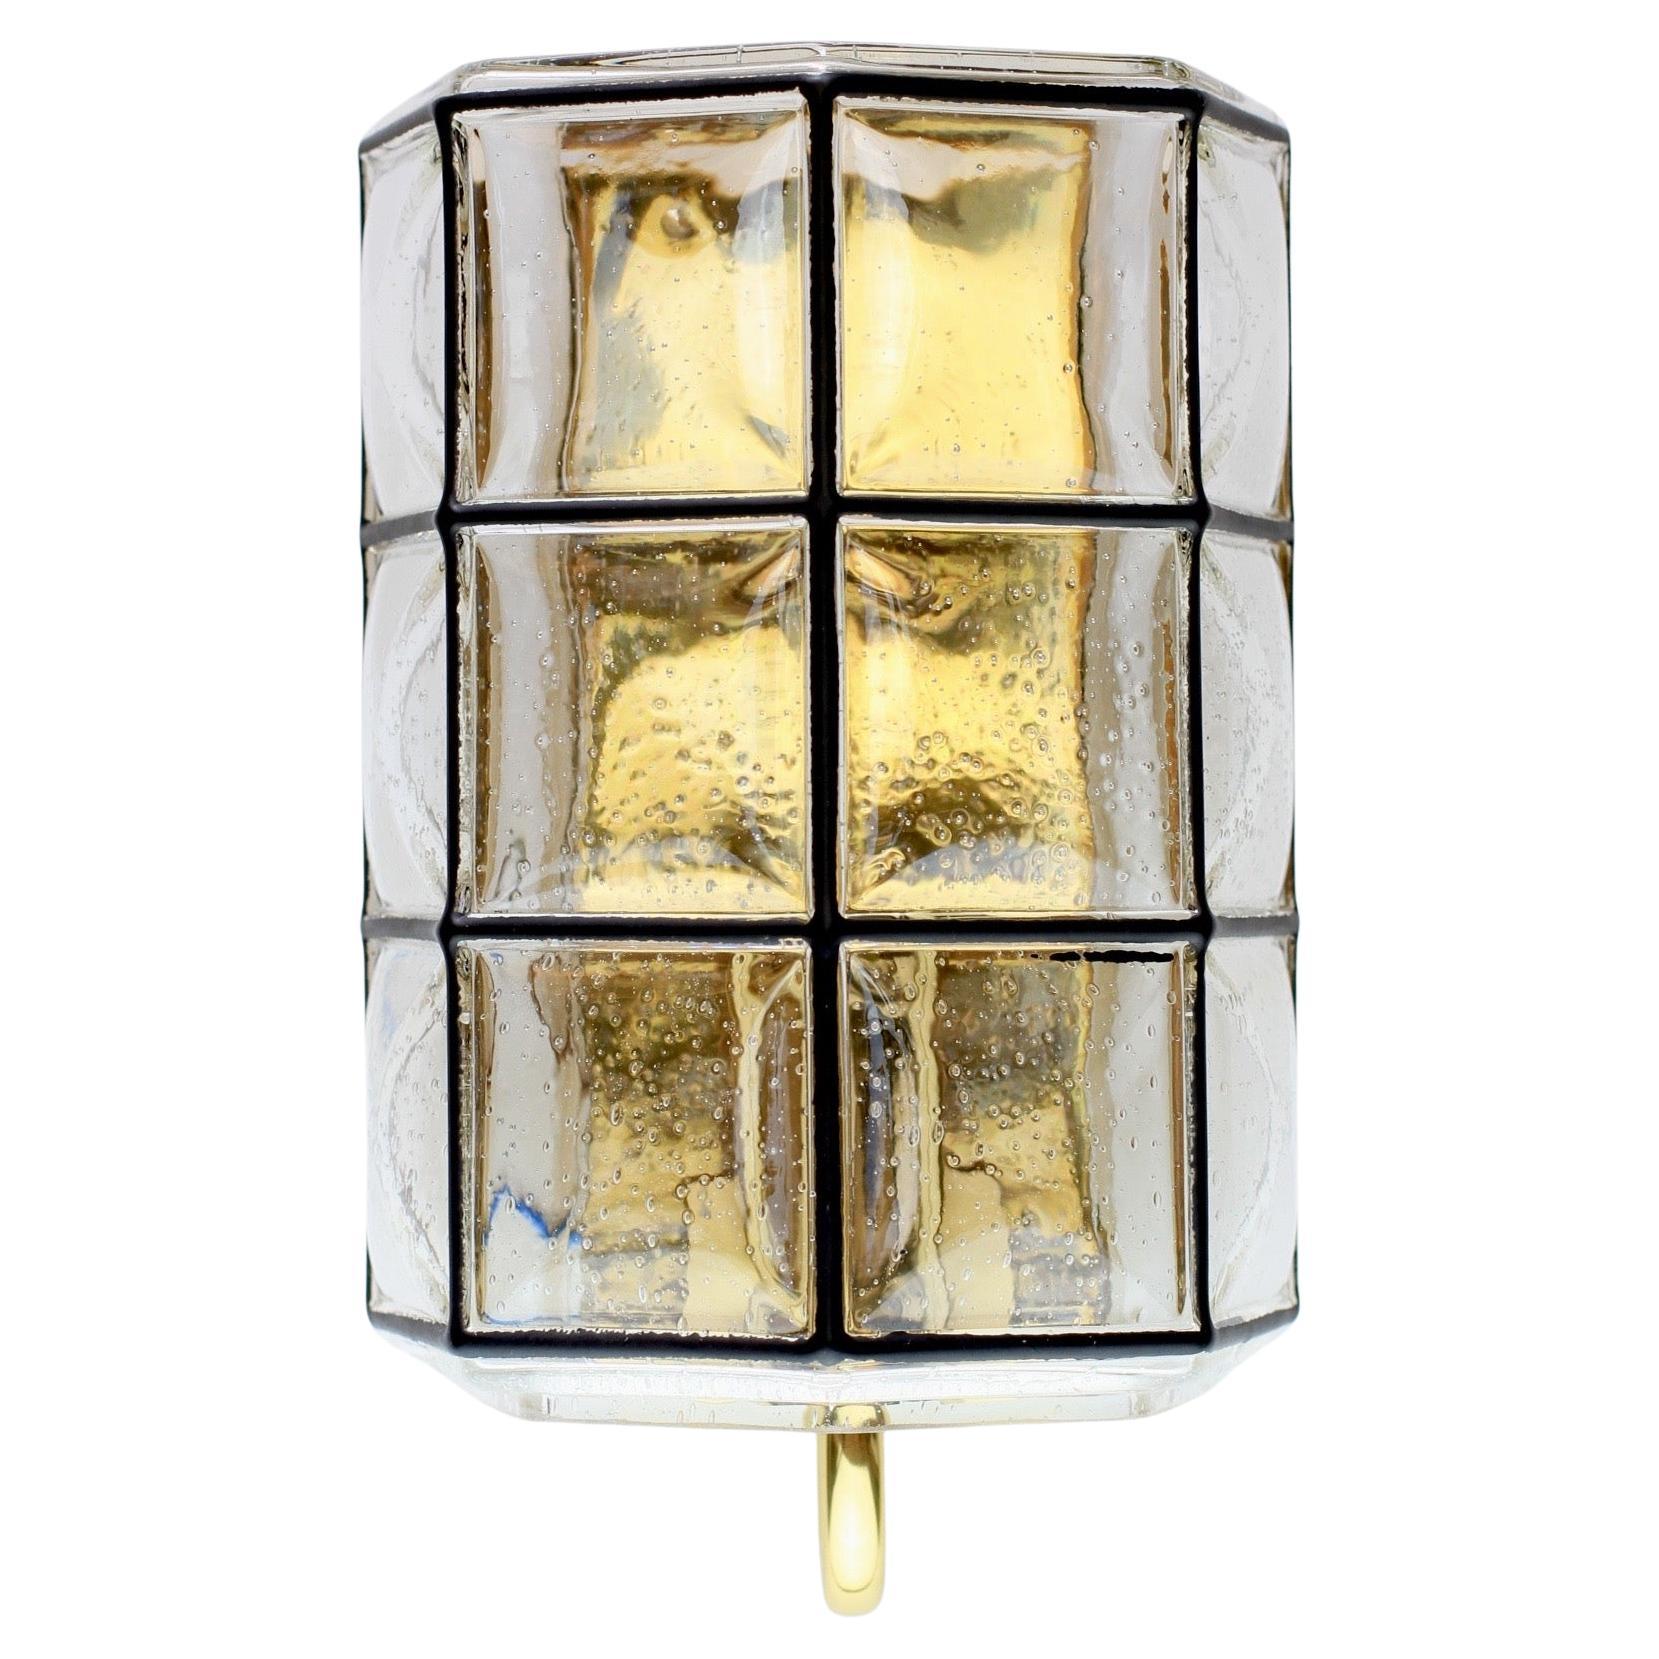 1 of 4 Limburg Vintage Mid-Century Iron Brass & Bubble Glass Wall Lights Sconces For Sale